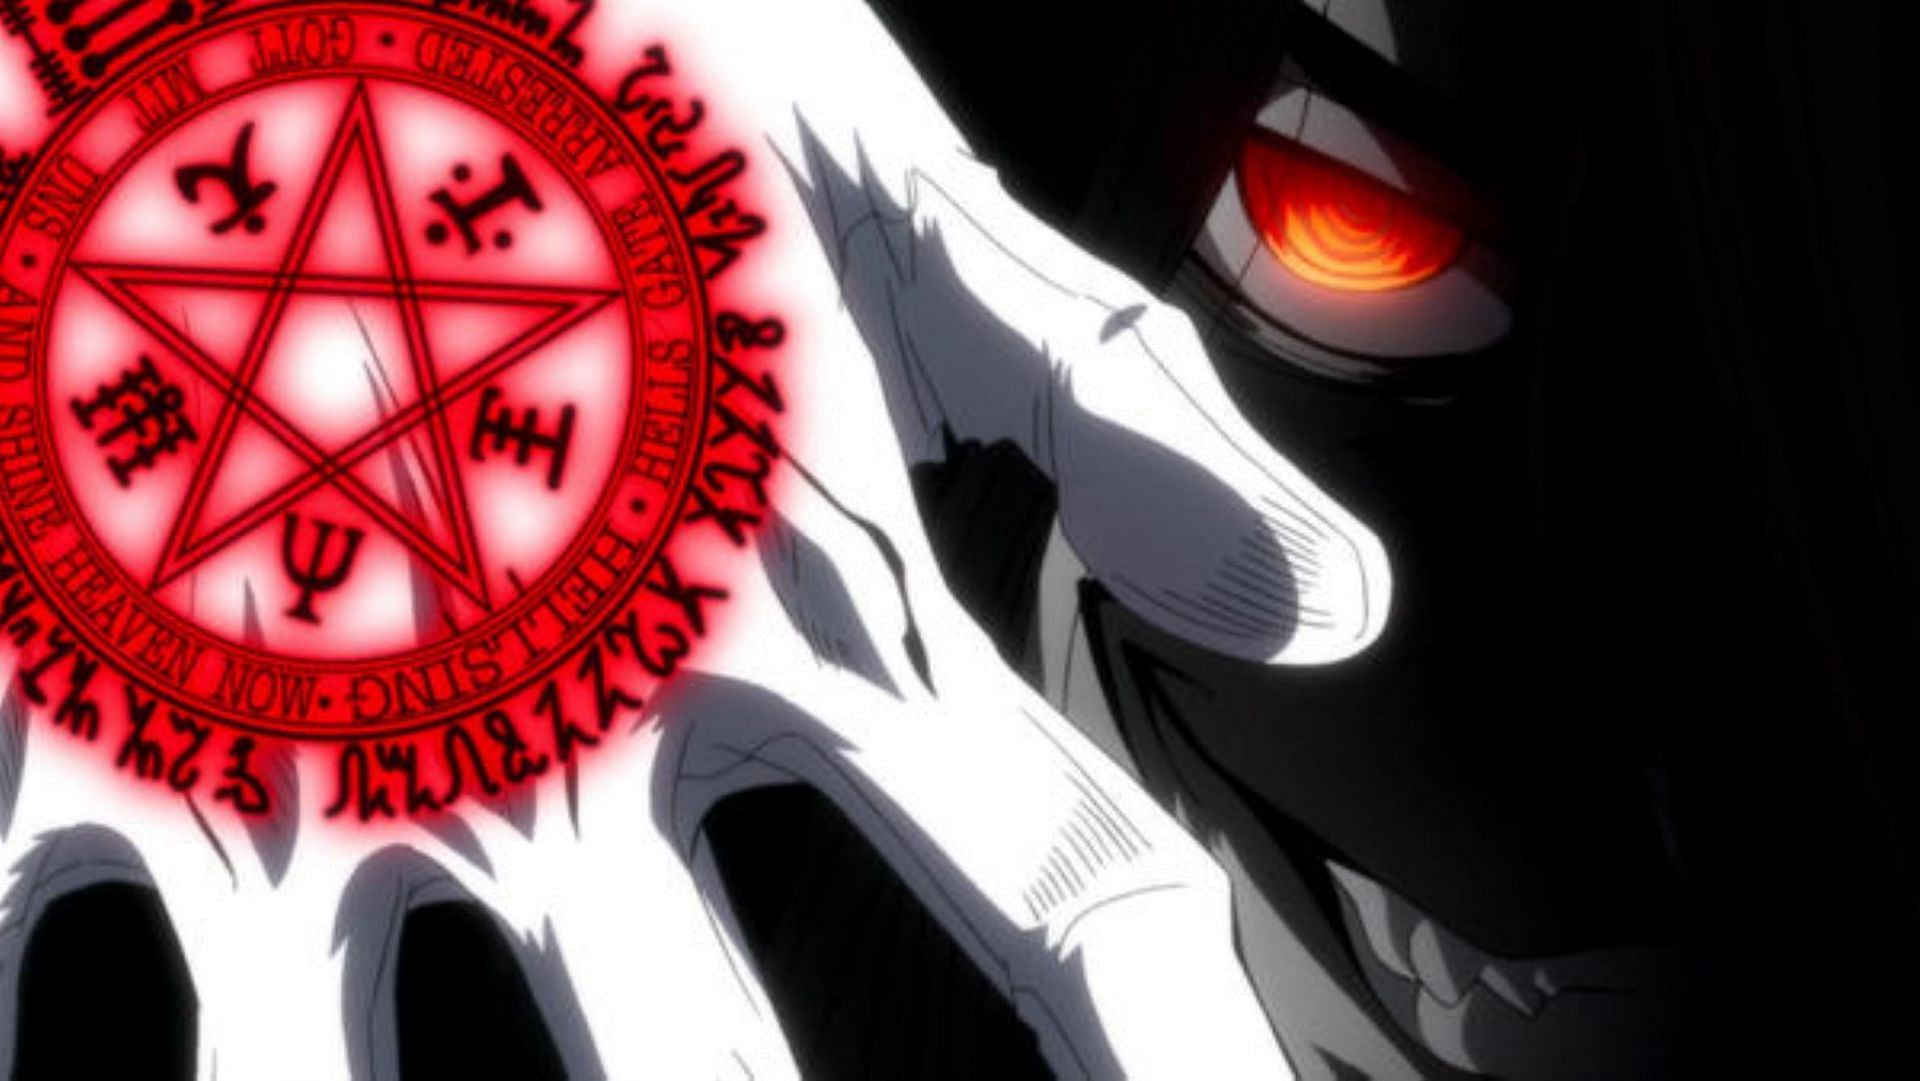 Alucard as of Hellsing Ultimate (Image via Studio Satelight/Madhouse/Graphinica)